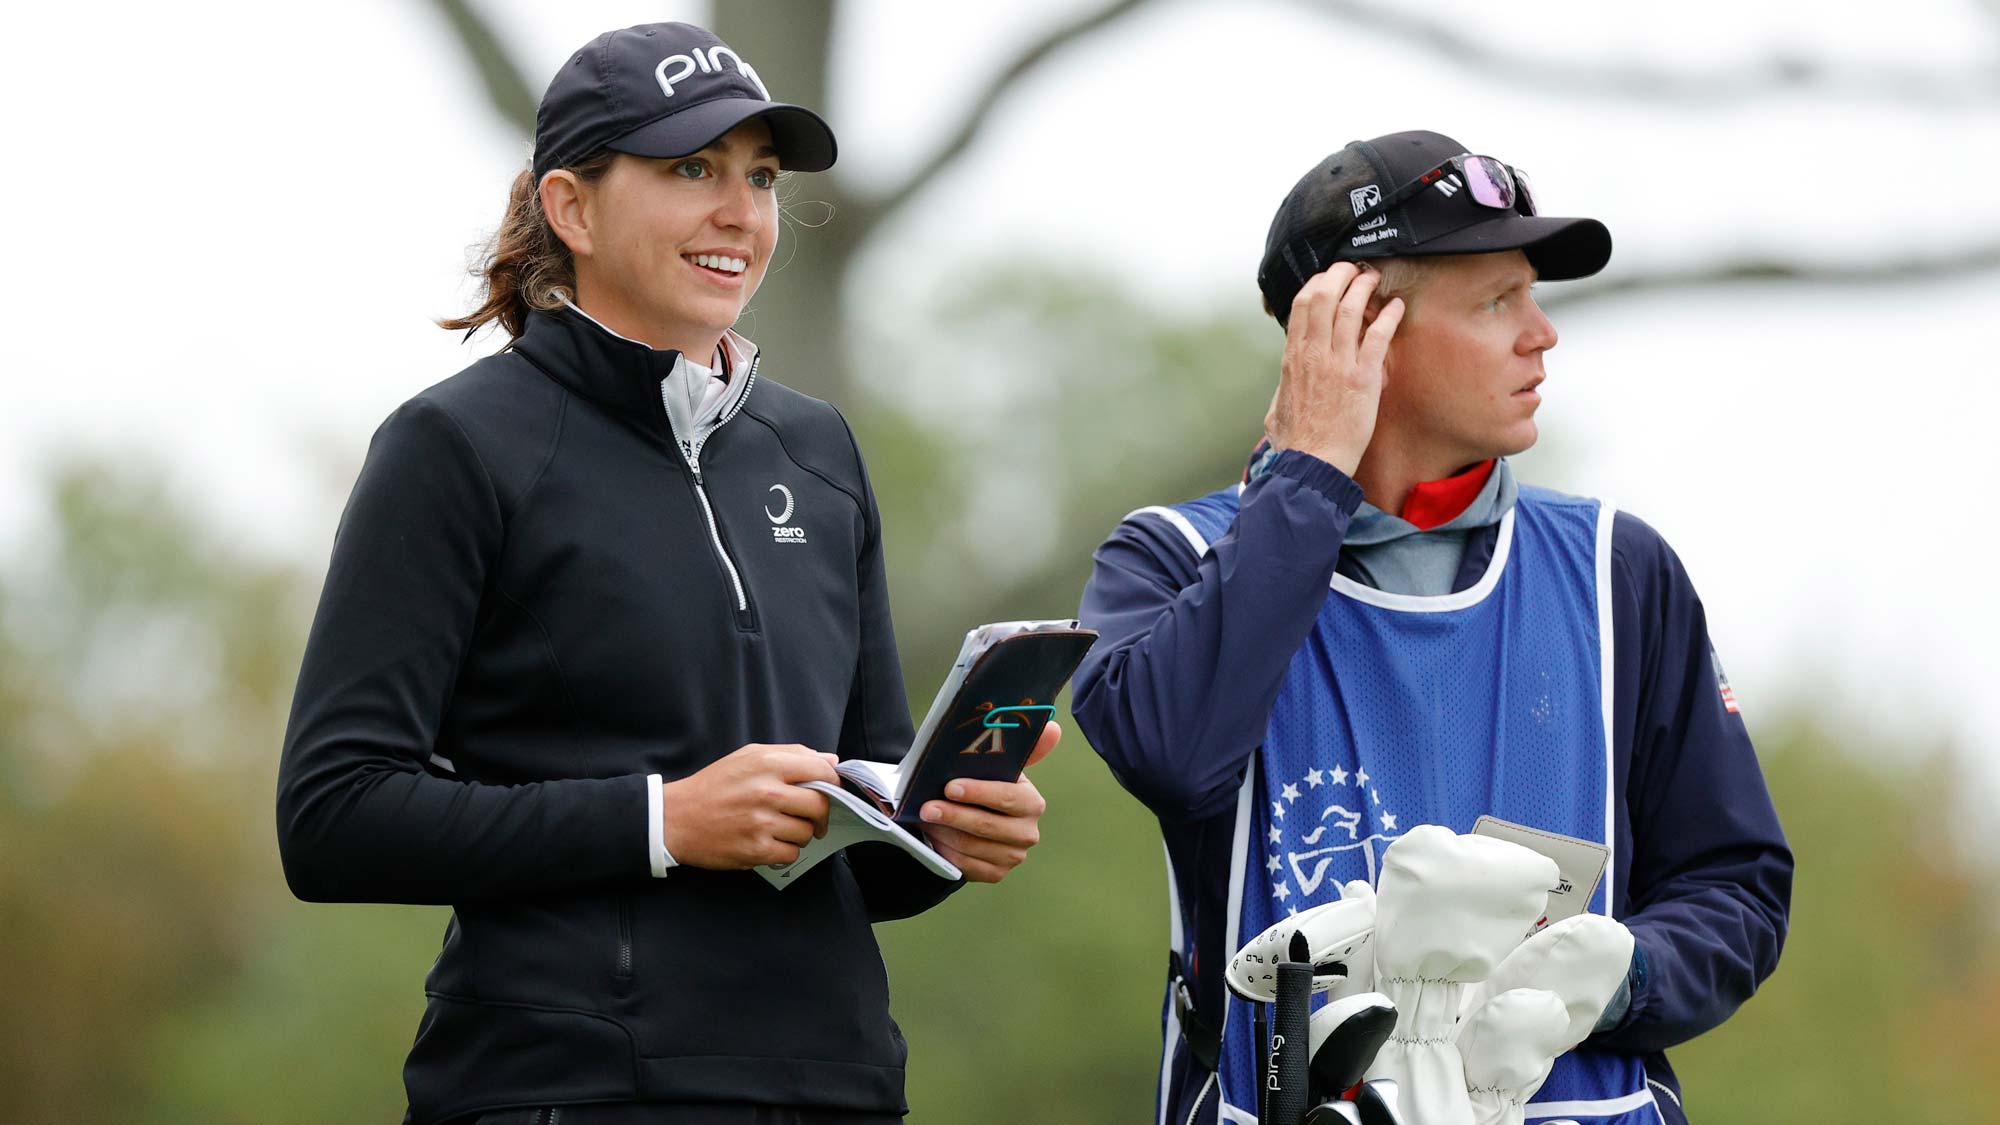 Elizabeth Szokol of the United States talks with her caddie before hitting her tee shot on the 2nd hole during the final round of the Cognizant Founders Cup